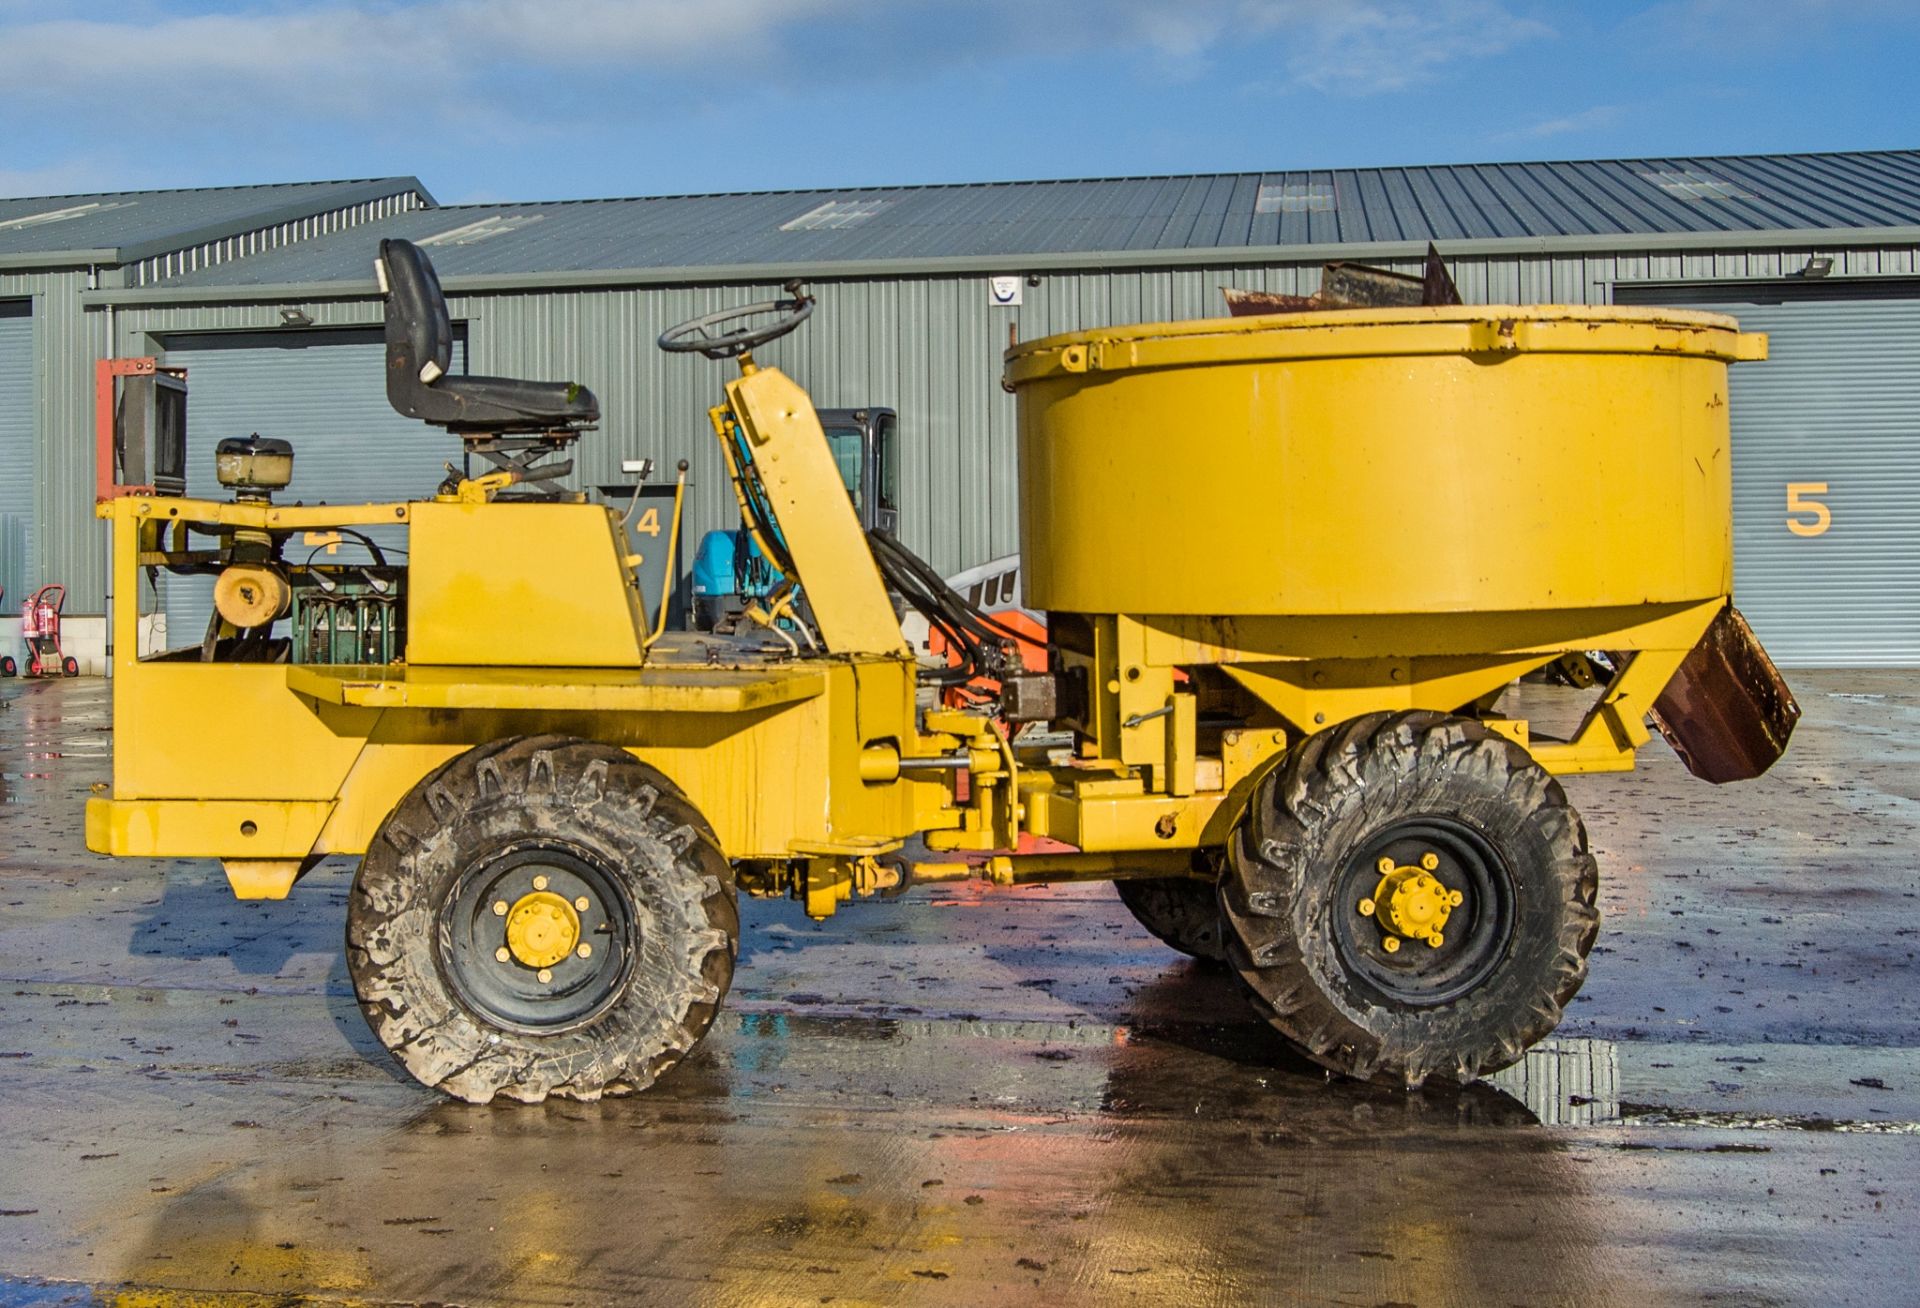 Mobile hydraulic pan mixer converted from a 3 tonne dumper - Image 8 of 19